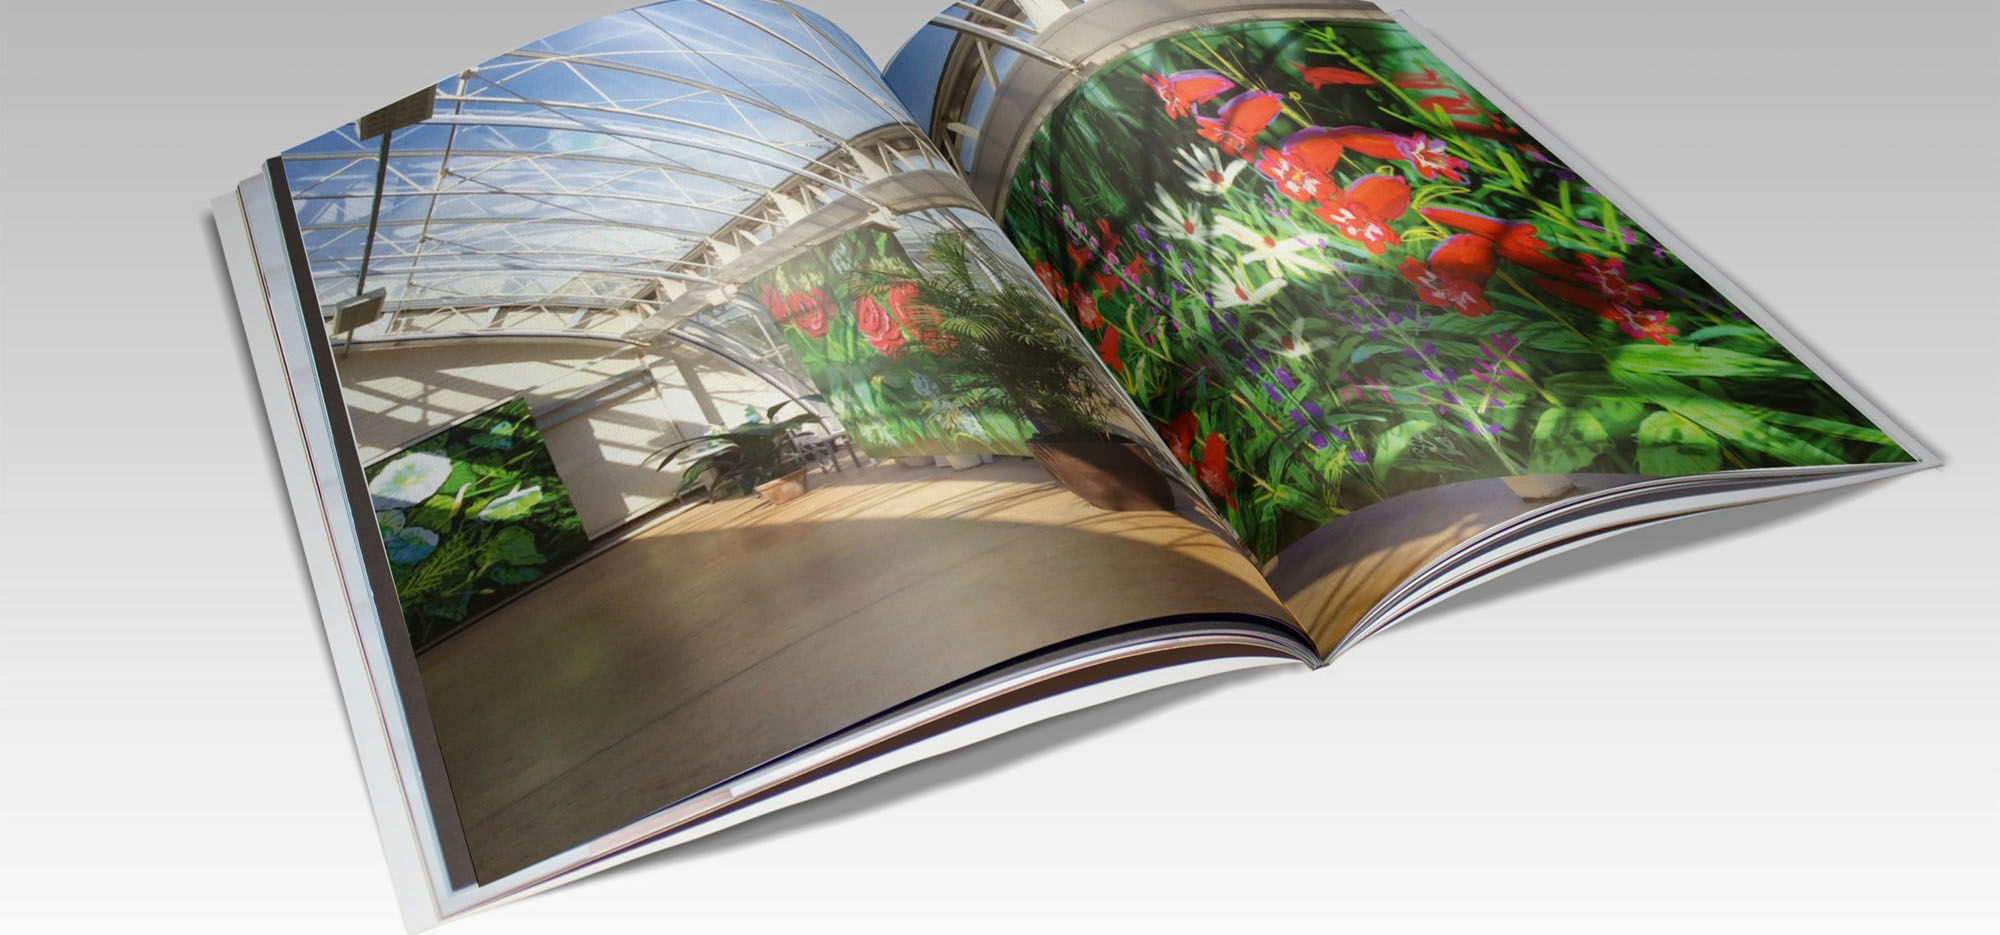 Publication. ‘Andy Maitland, The Digital Garden® 2018, iPad drawings with Augmented Reality at the Royal Horticultural Society’ book spread